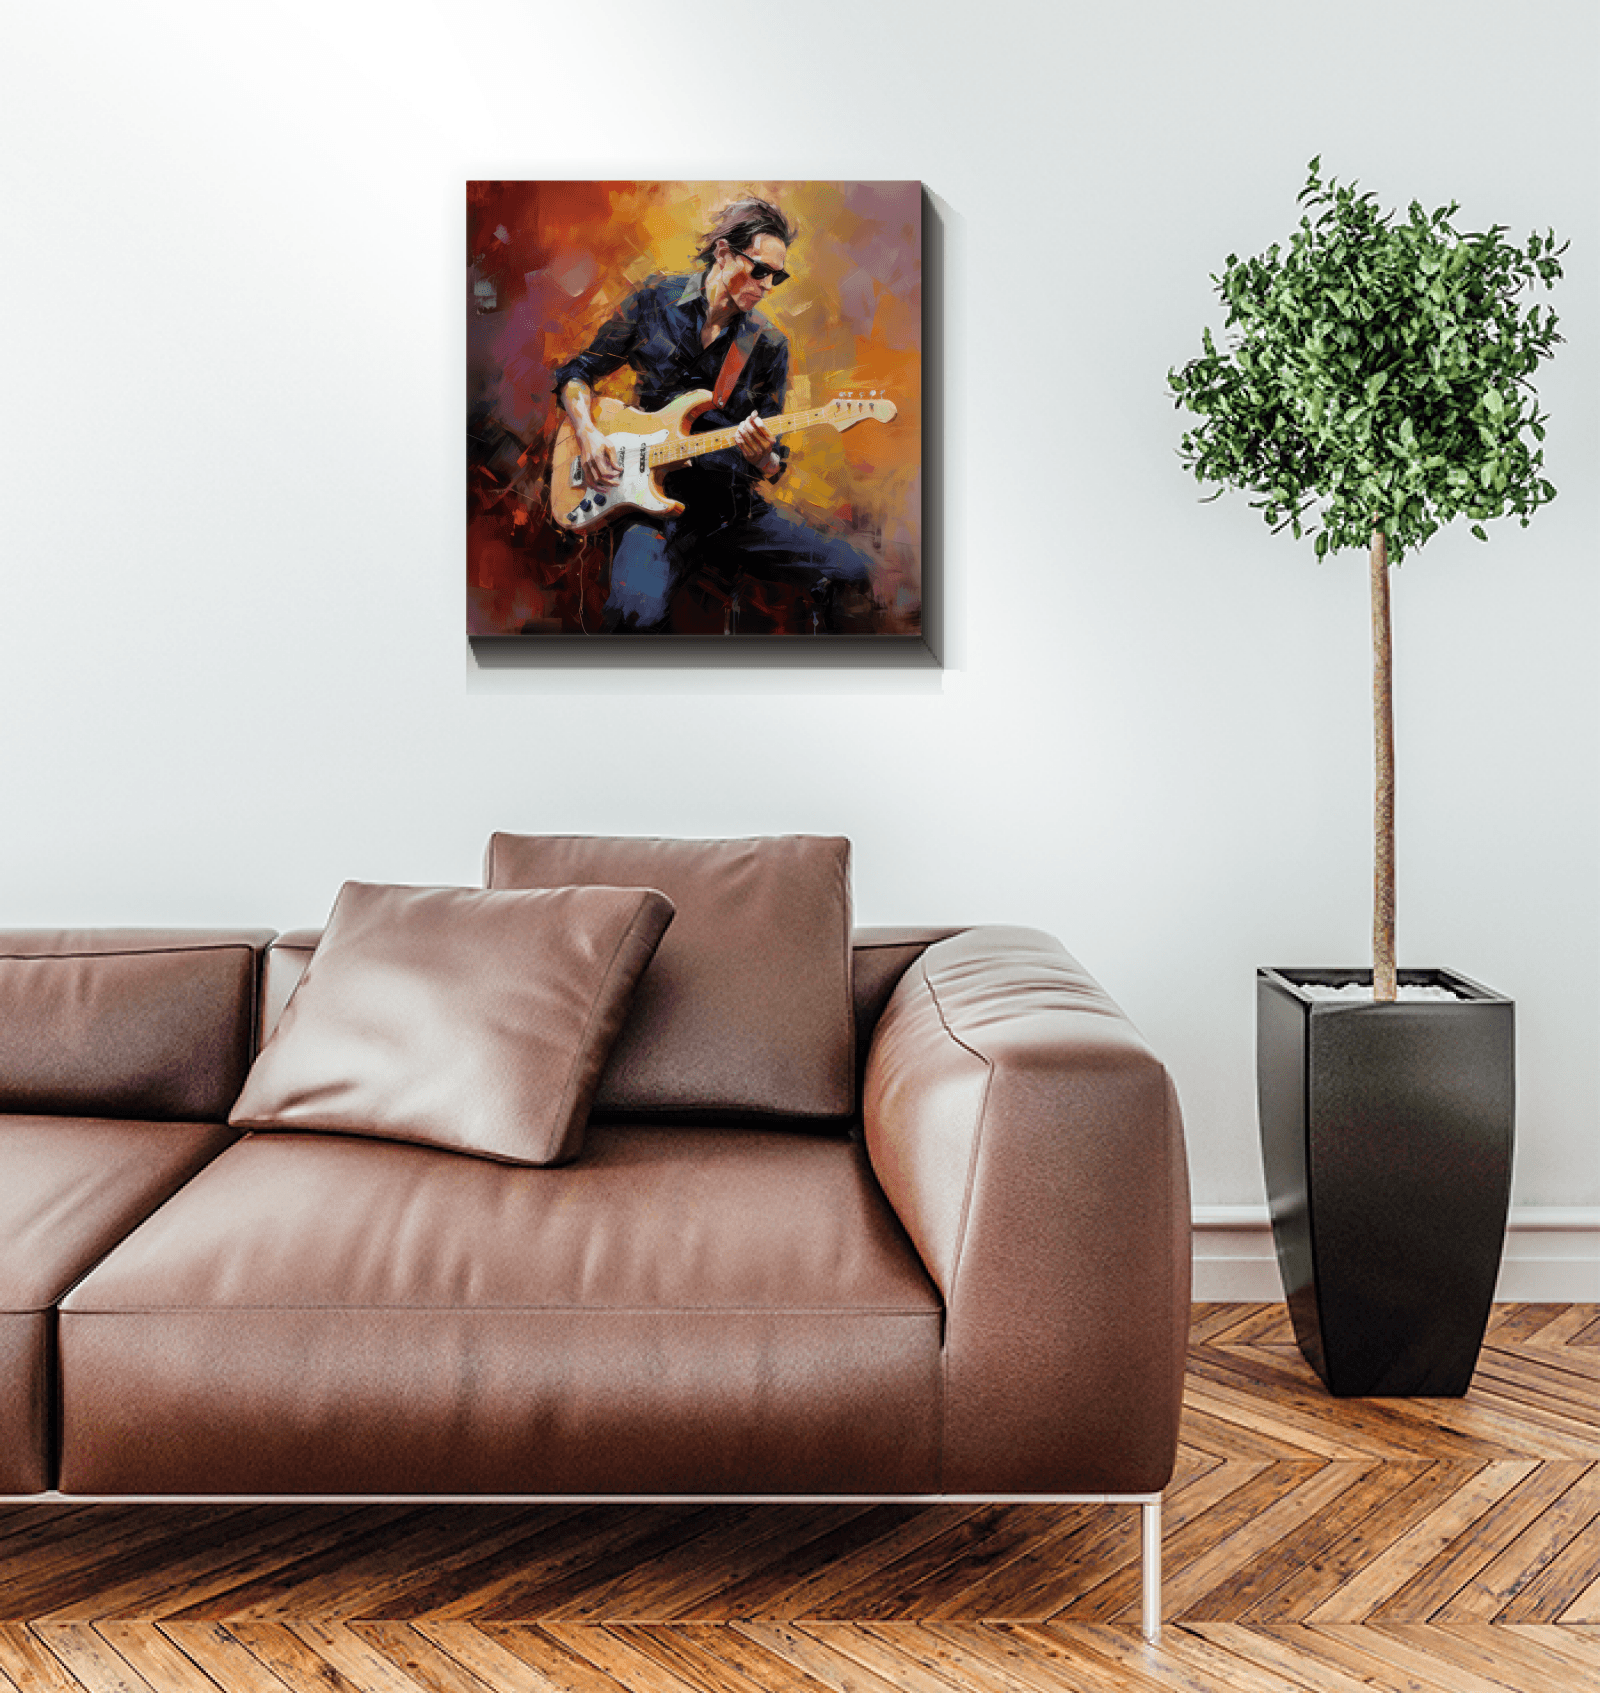 Strumming Showcase Canvas featuring abstract guitar art